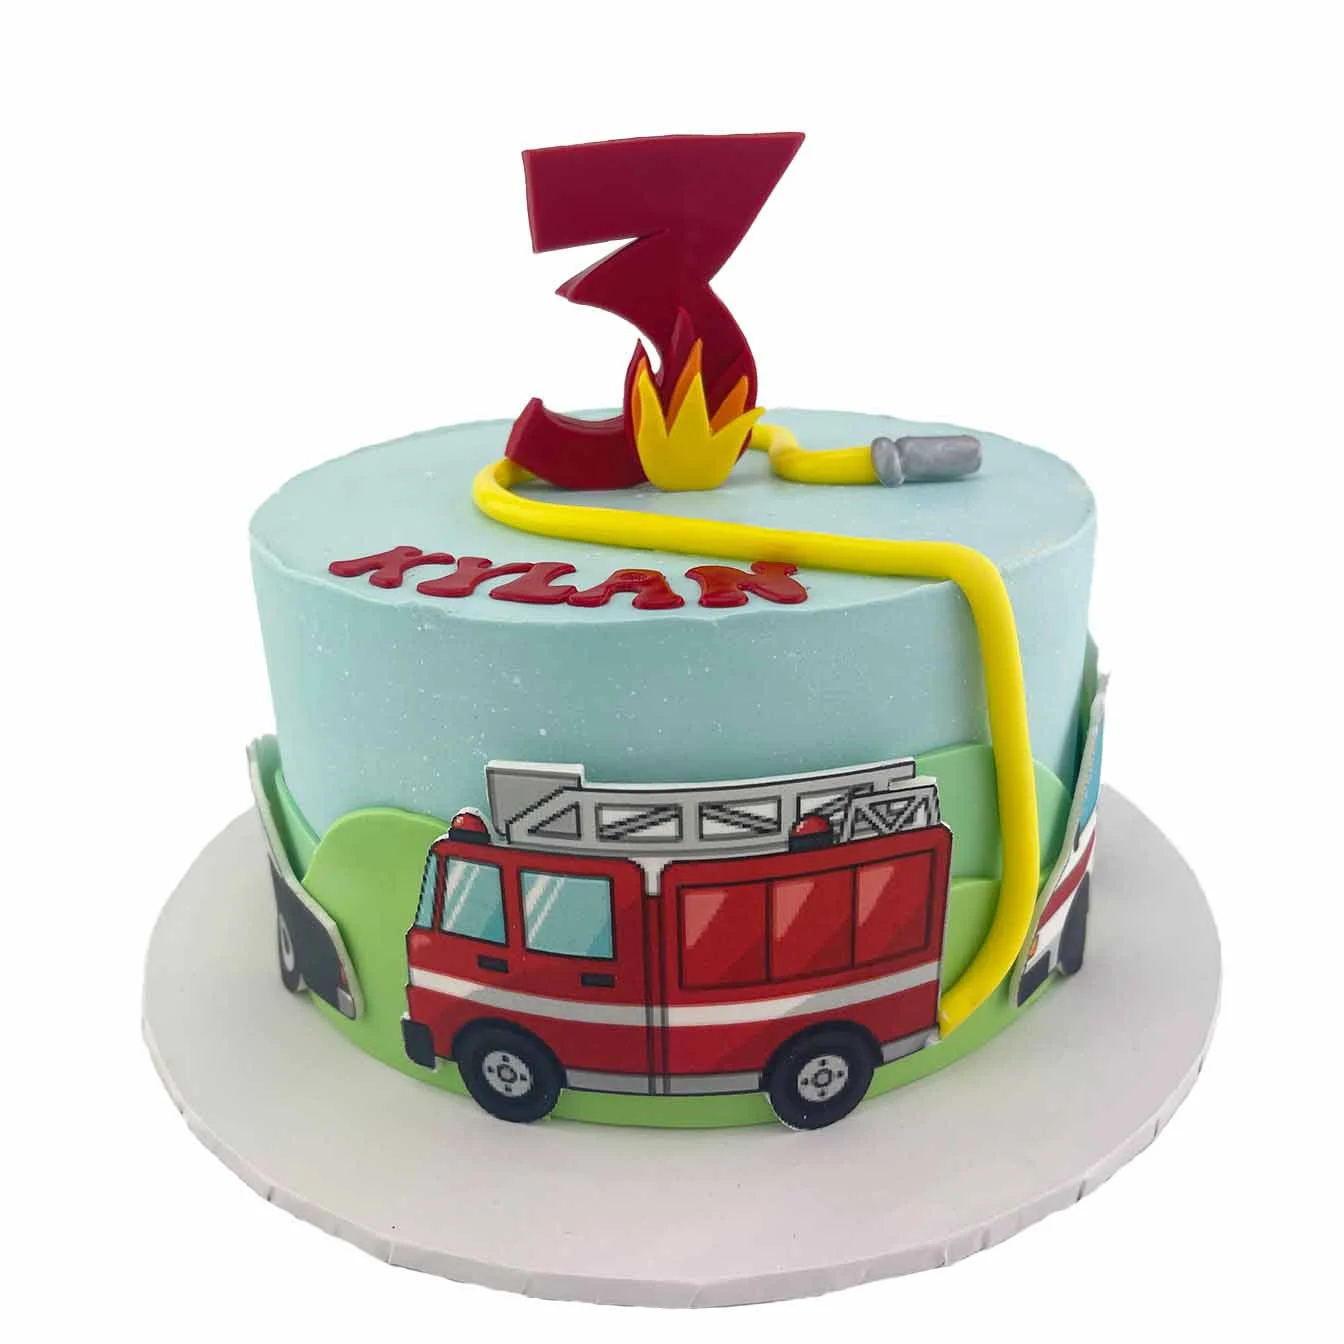 Fire Brigade Hero Cake - A blue iced cake with age and flames, a fire hose, and edible images of a fire truck and transport vehicles, a captivating centrepiece for firefighting enthusiasts and birthday celebrations.